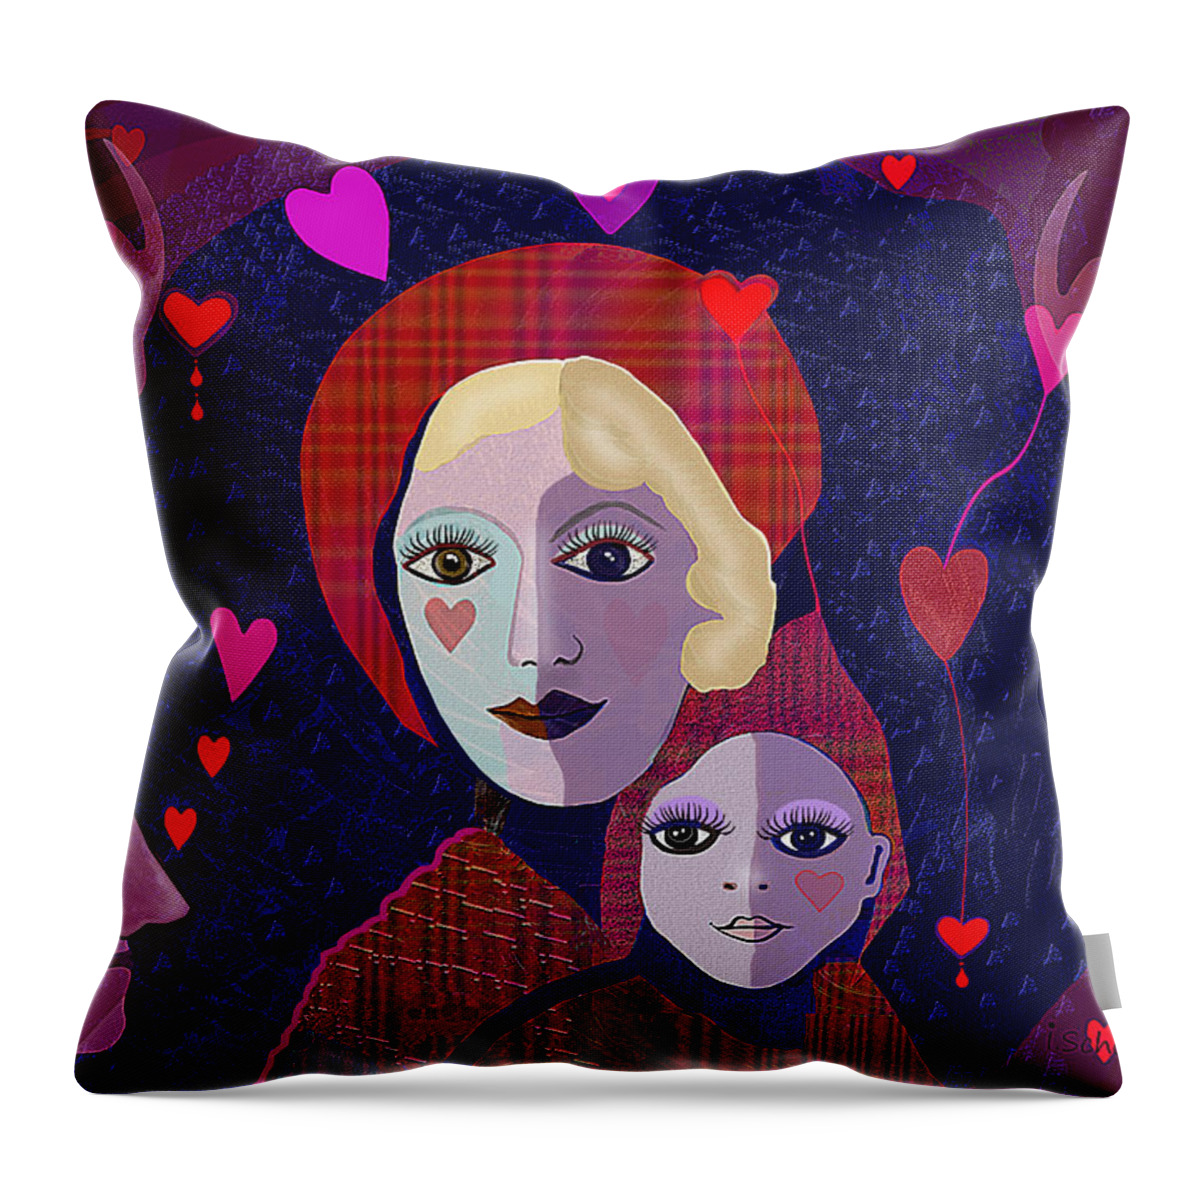 638 Mother Child Hearts A Throw Pillow featuring the painting 638 Mother Child Hearts A by Irmgard Schoendorf Welch